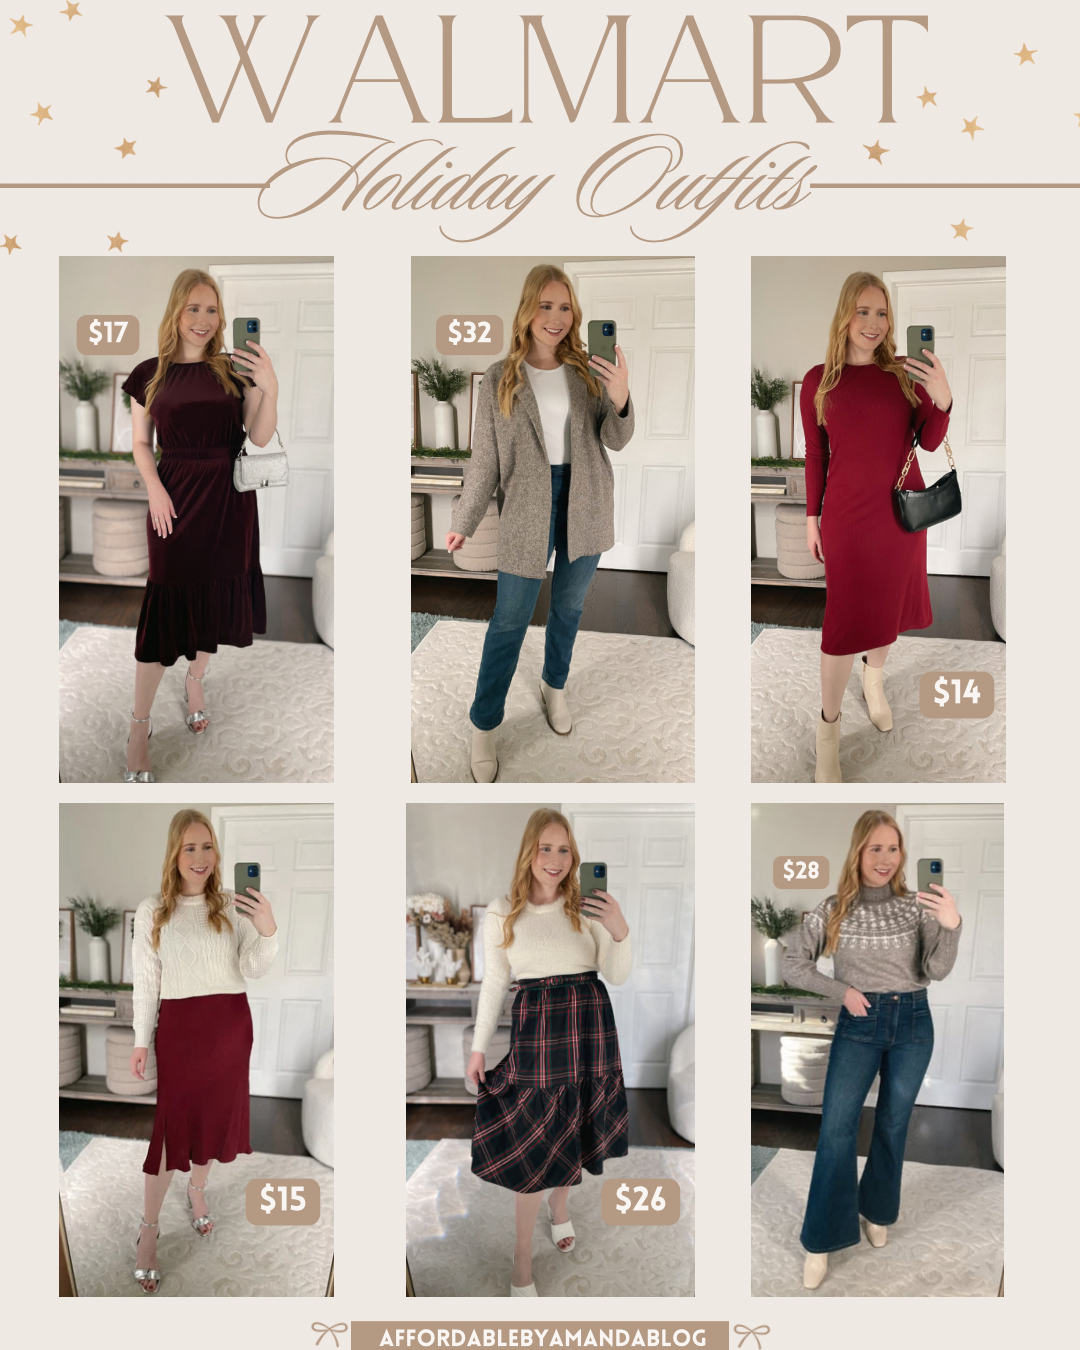 Holiday Outfit Ideas - holiday party outfit - christmas outfit - Walmart fashion - Walmart holiday outfits